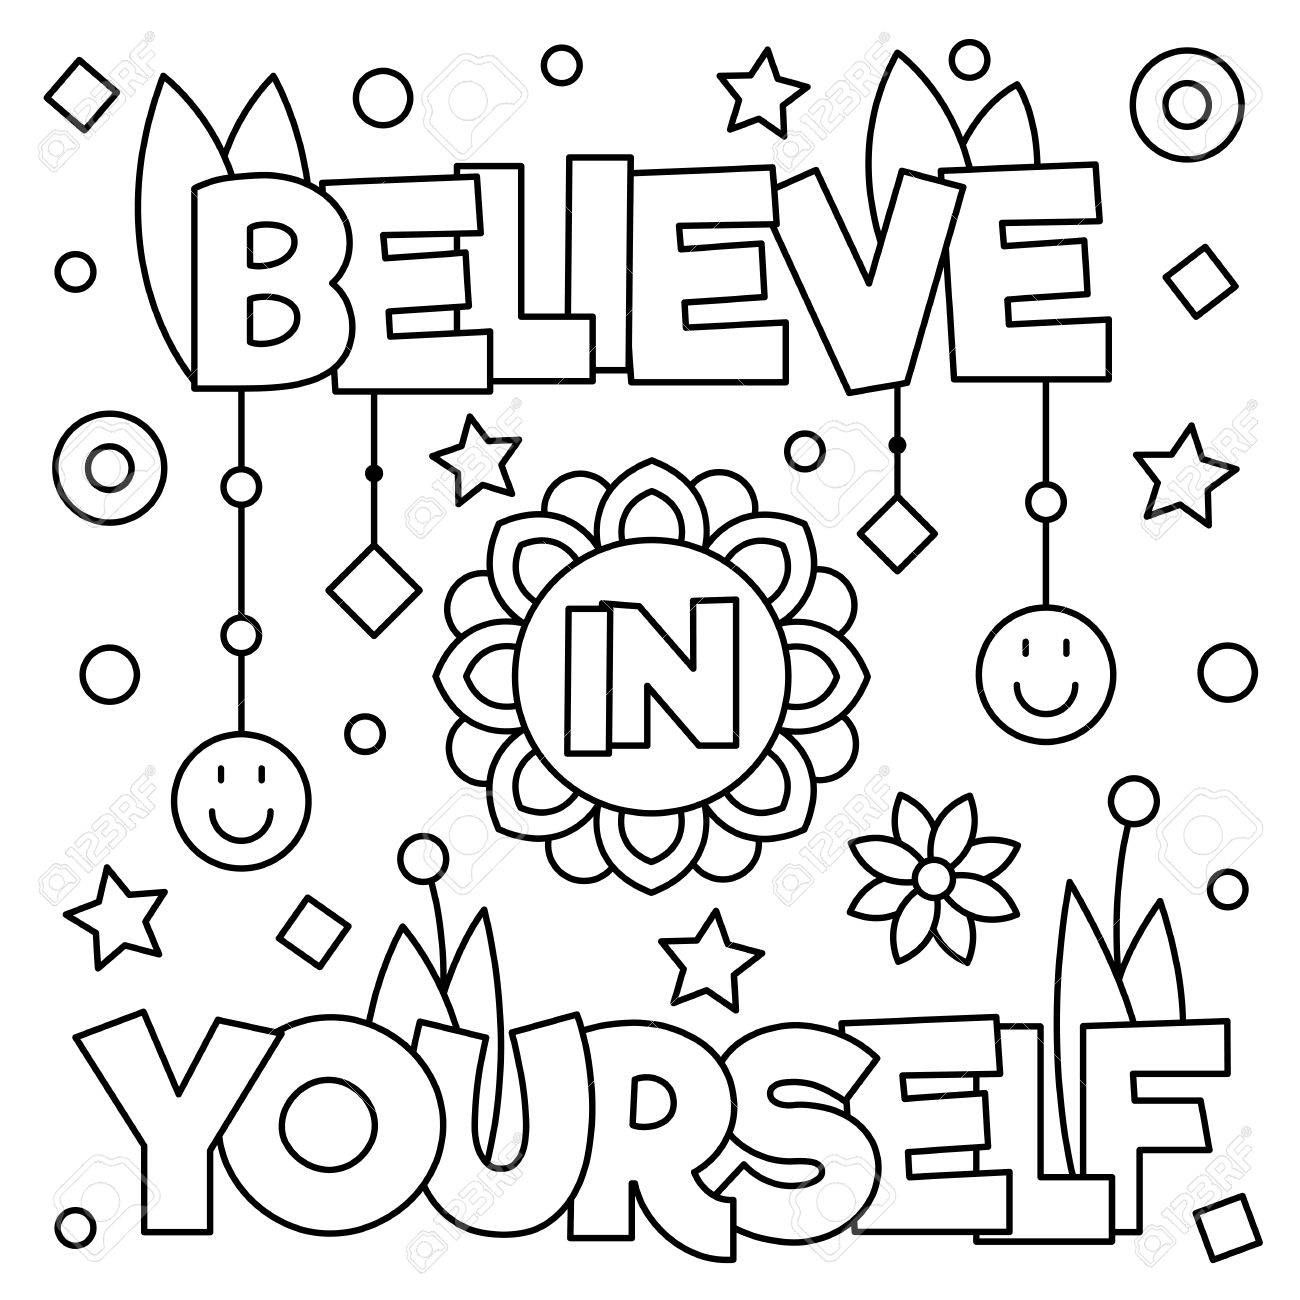 Believe in yourself. Coloring page. Black and white vector illustration. | Coloring  pages inspirational, Quote coloring pages, Coloring pages